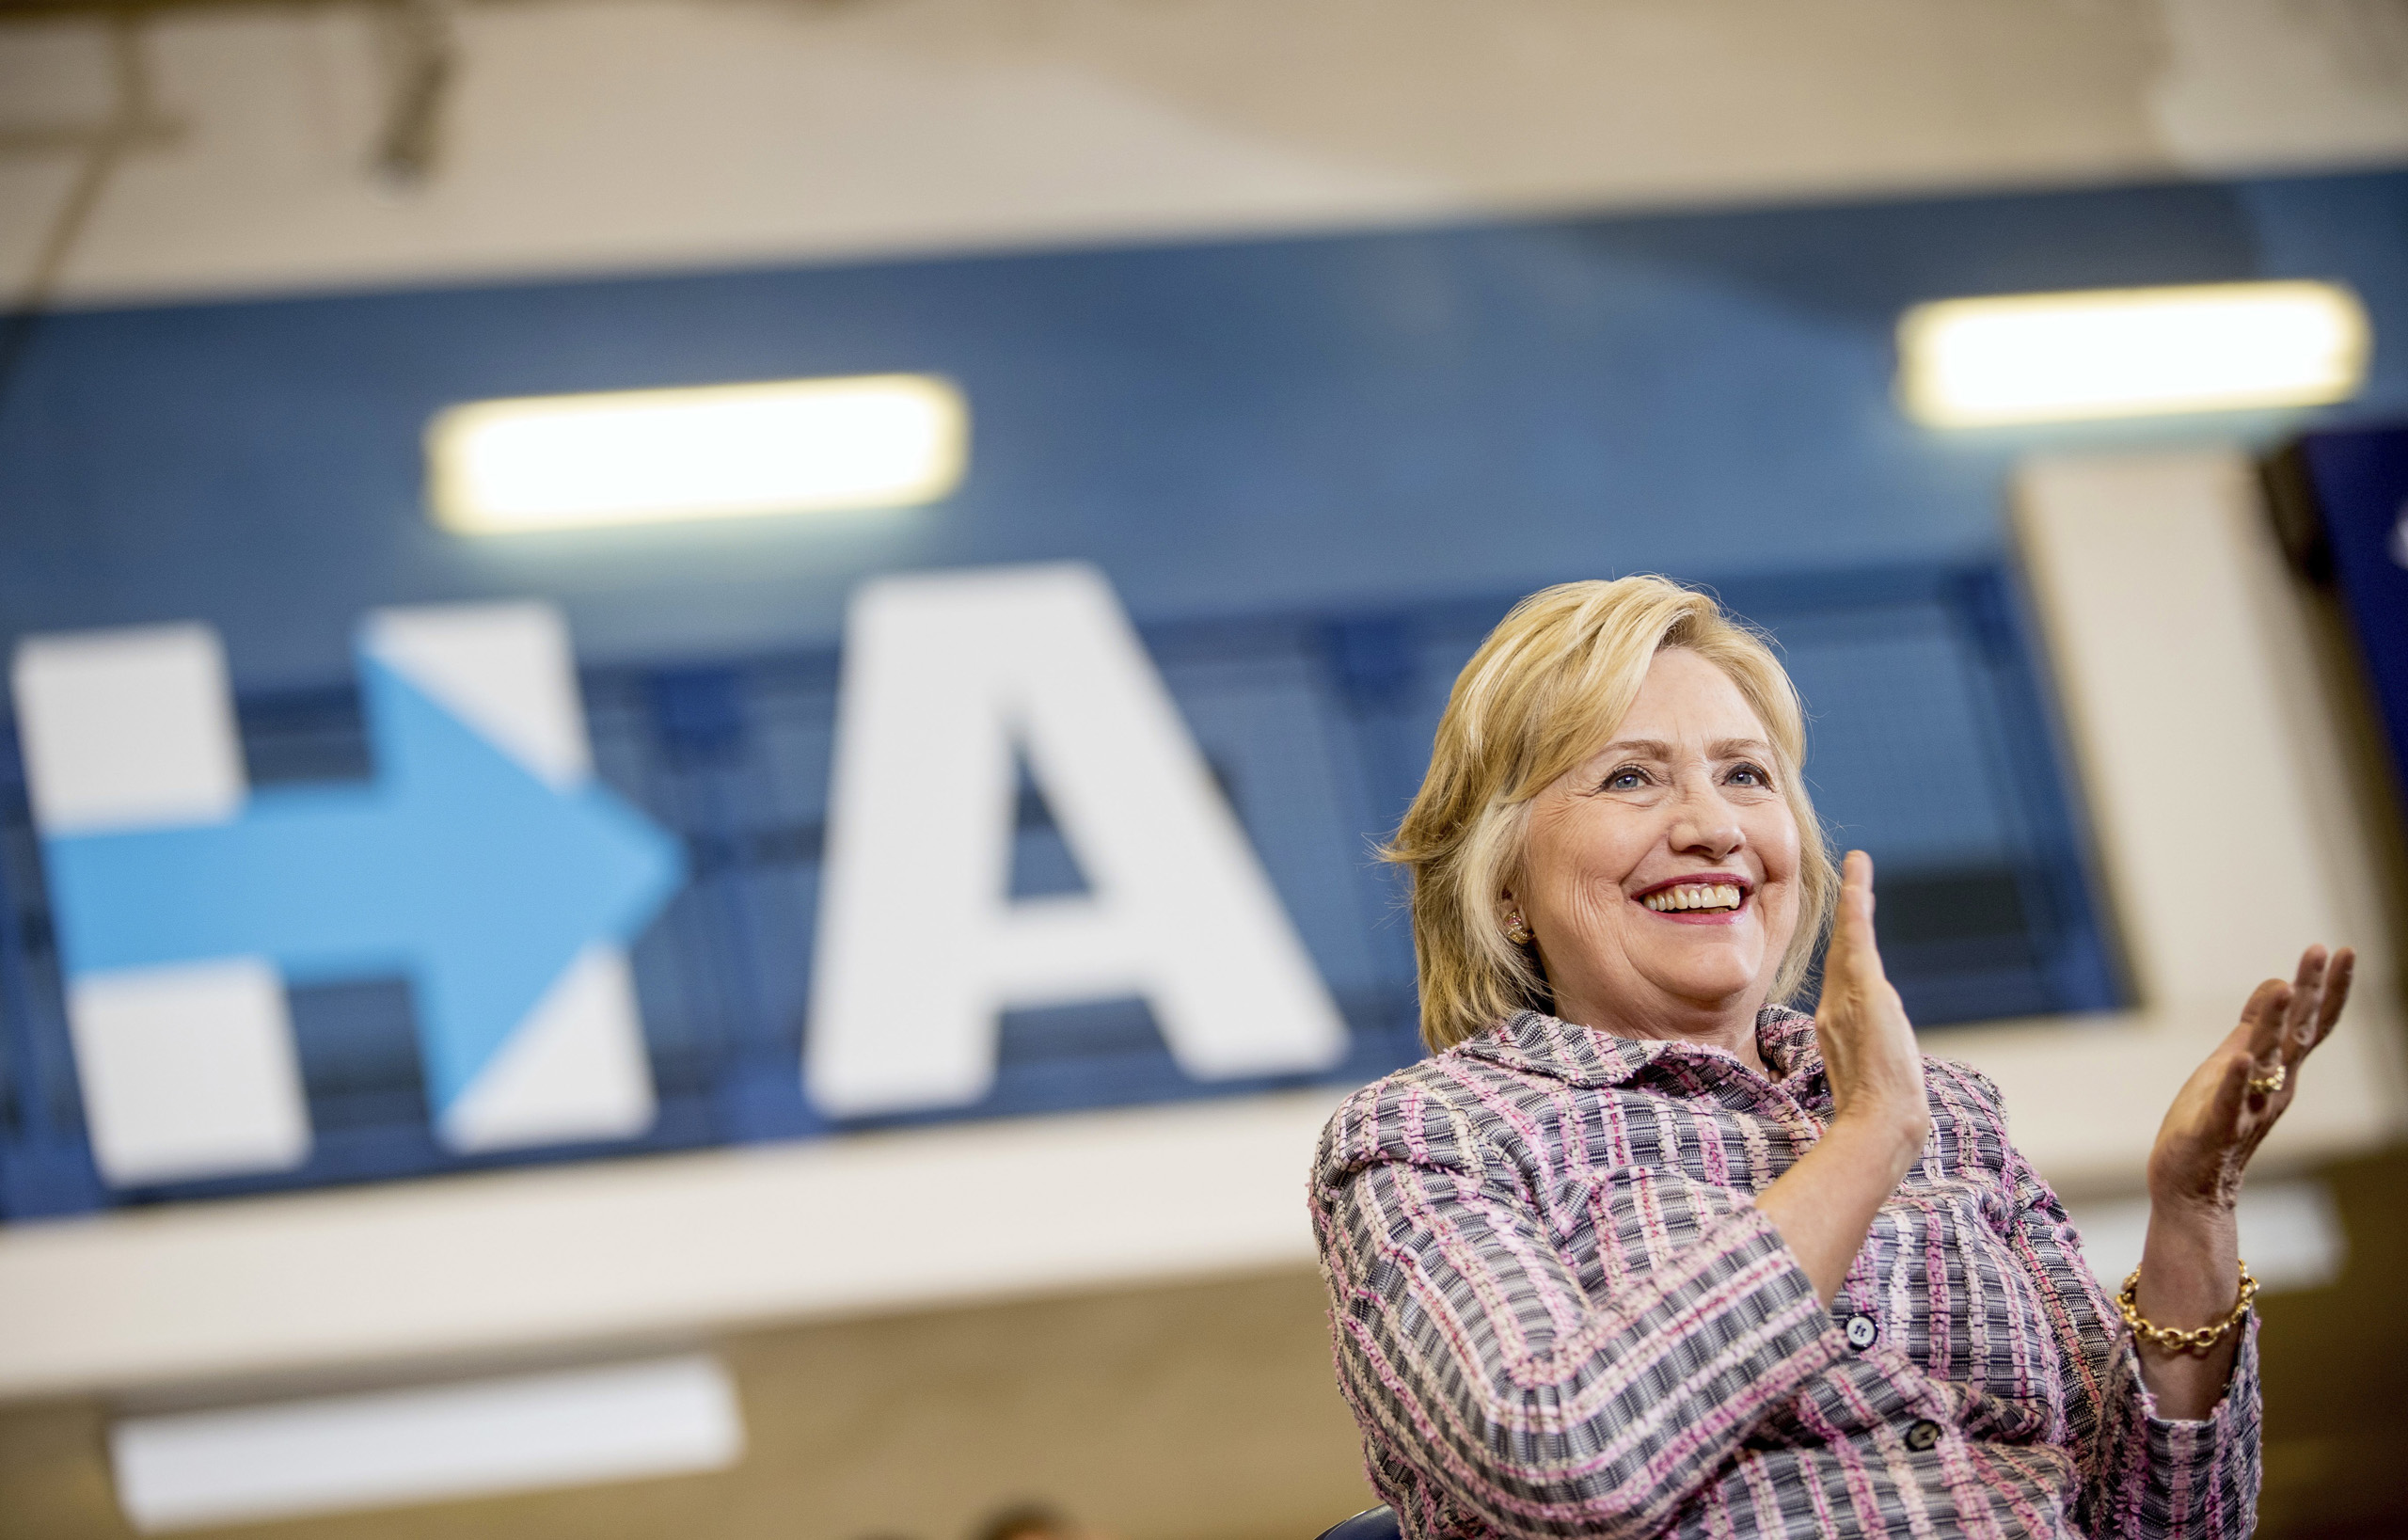 Democratic presidential candidate Hillary Clinton applauds as she sits on stage at a rally at Omaha North High Magnet School in Omaha, Neb. on Aug. 1, 2016. (Andrew Harnik—AP)